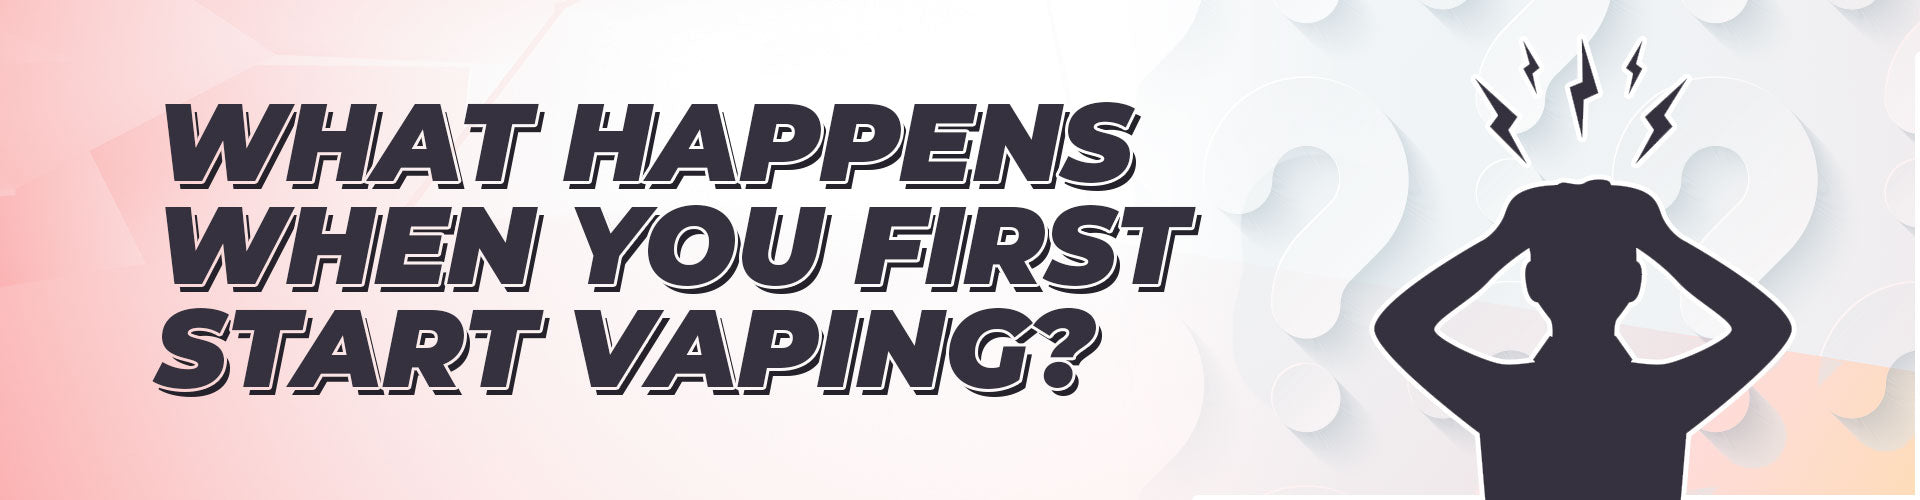 What Happens When You First Start Vaping?